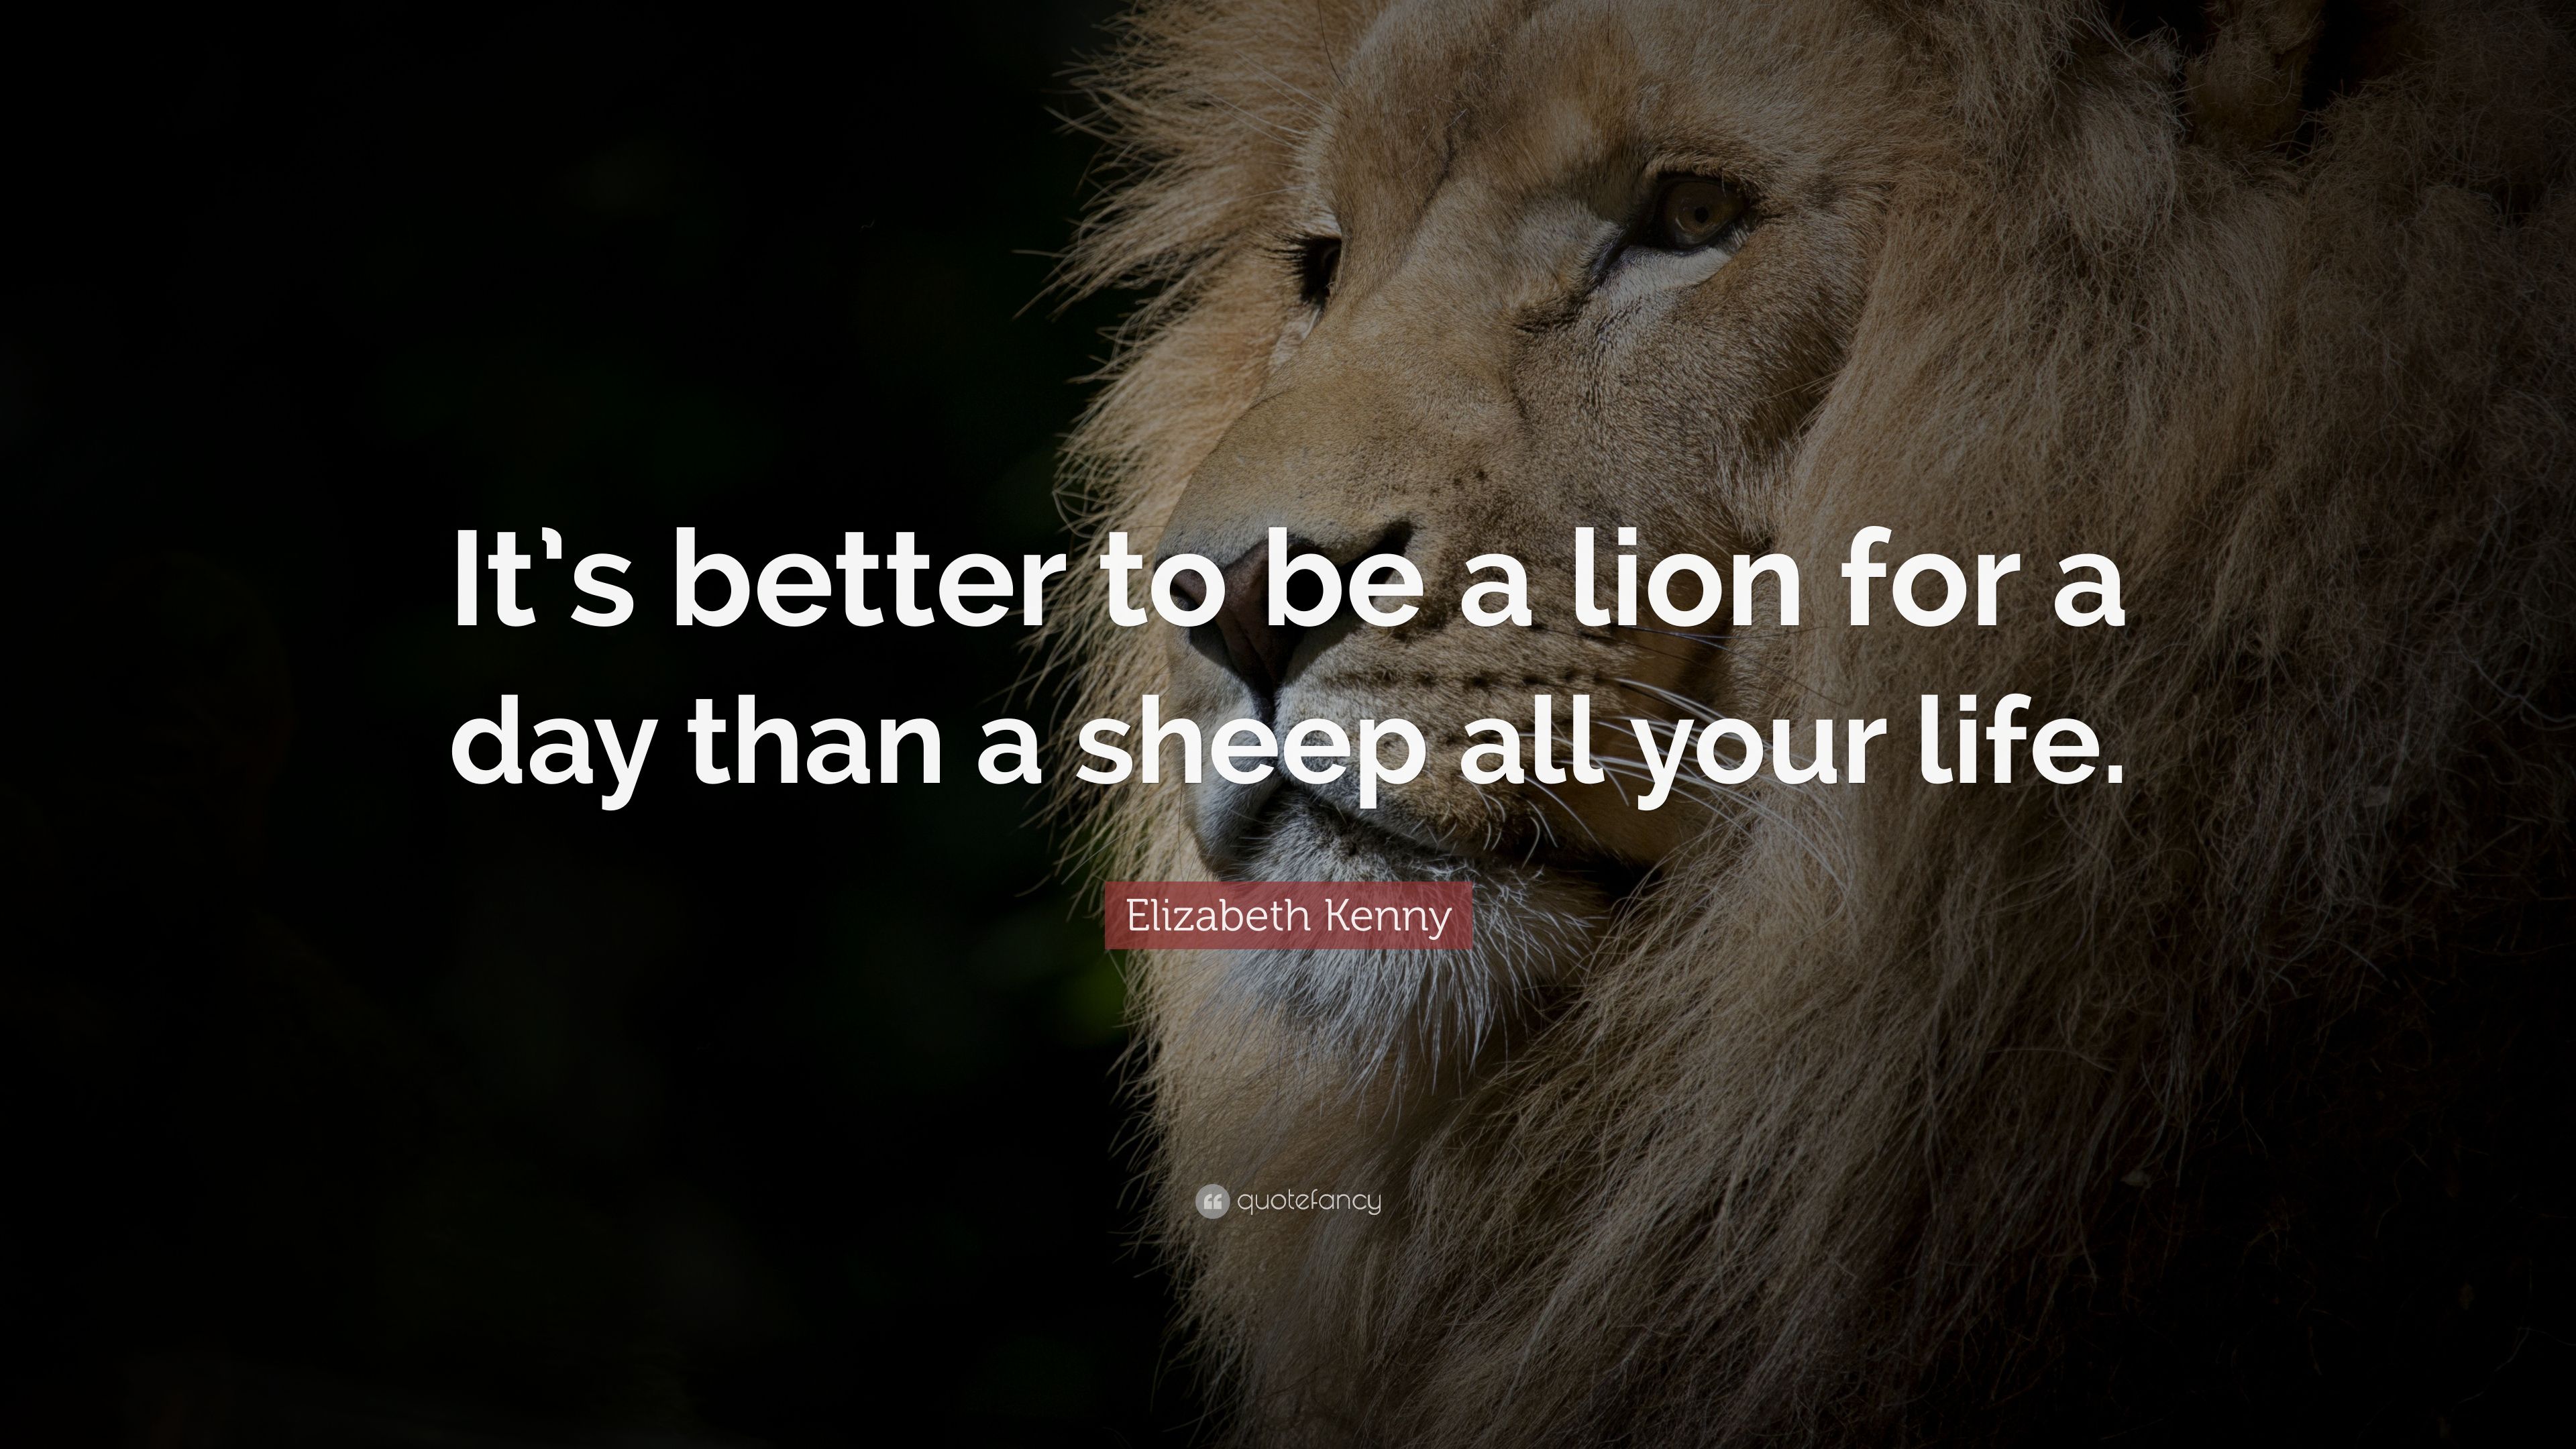 Elizabeth Kenny Quote: “It's better to be a lion for a day than a